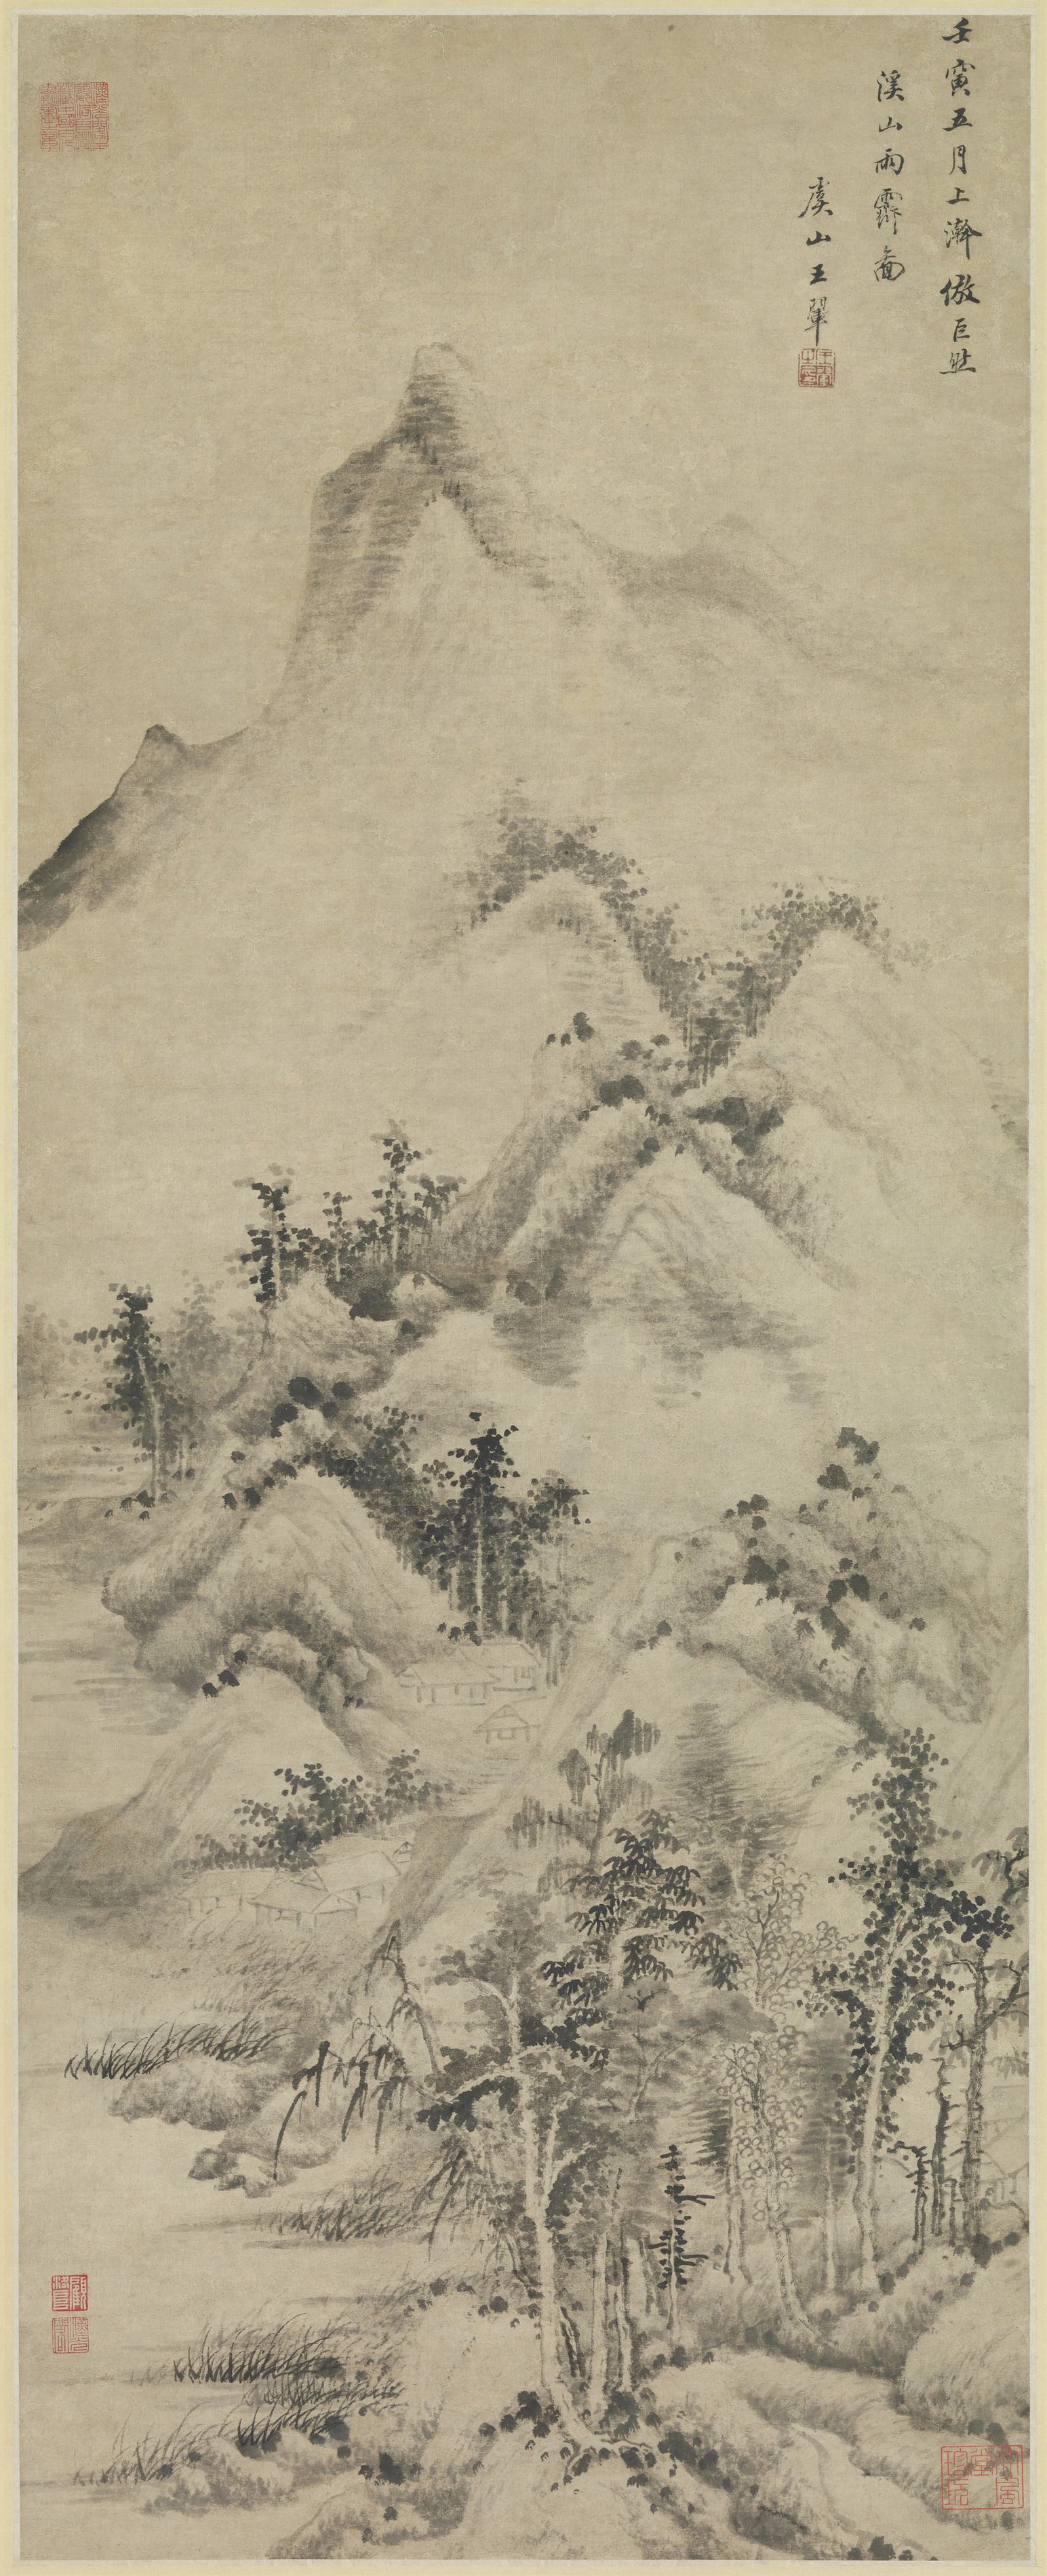 Clearing after Rain over Streams and Mountains, Wang Hui (王翚)